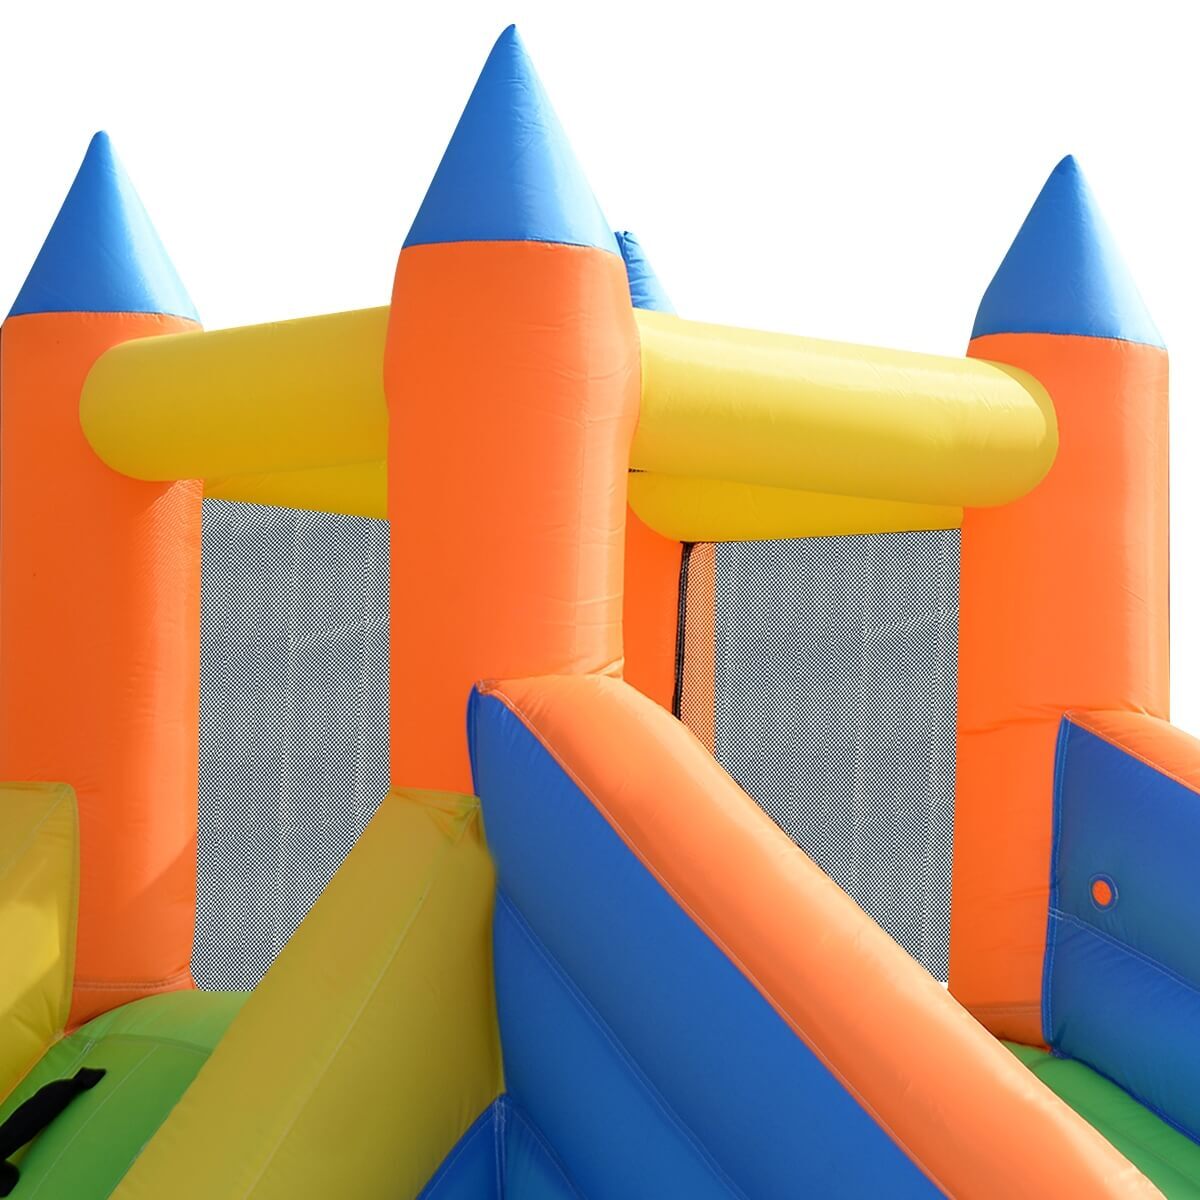 Inflatable Mighty Bounce House Jumper with Water Slide, Blower Not Included